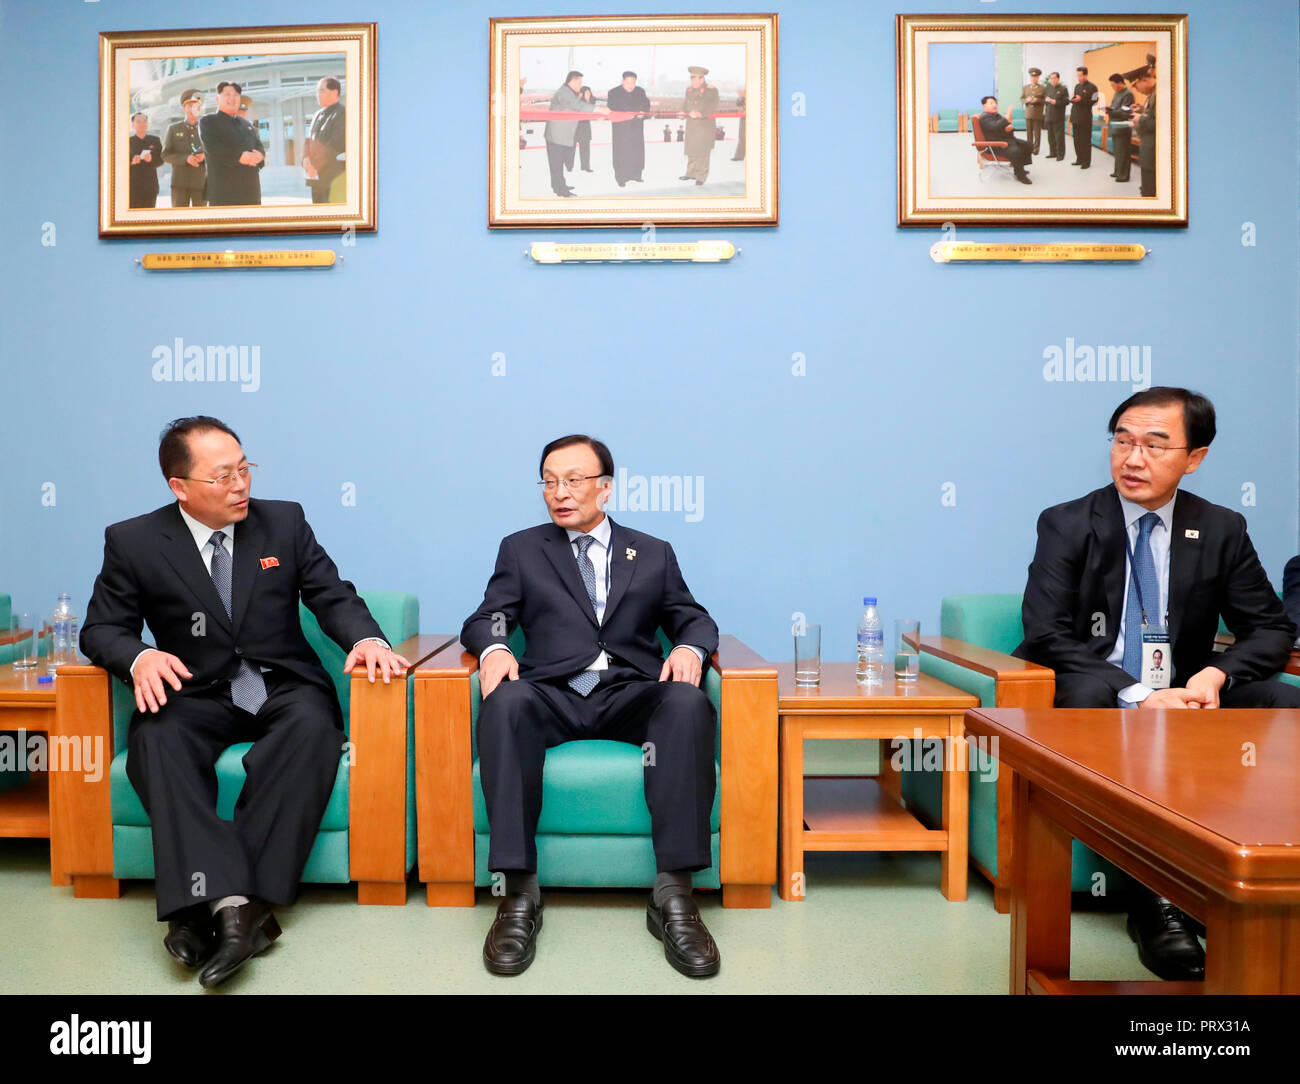 Anniversary of the 2007 inter-Korean summit, Oct 4, 2018 : Vice chairman of the (North Korean) Committee for the Peaceful Reunification of the Country, Jon Jong-su (L), South Korean Unification Minister Cho Myoung-Gyon (R) and South Korea's ruling Democratic Party leader Lee Hae-Chan talk at the Pyongyang Science and Technology Park in Pyongyang, North Korea in this picture taken by Joint Press Corps Pyeongyang. A group of South Korean government officials, politicians and civic and religious leaders are visiting Pyongyang from Oct 4-6 to participate in the first-ever inter-Korean event to cel Stock Photo